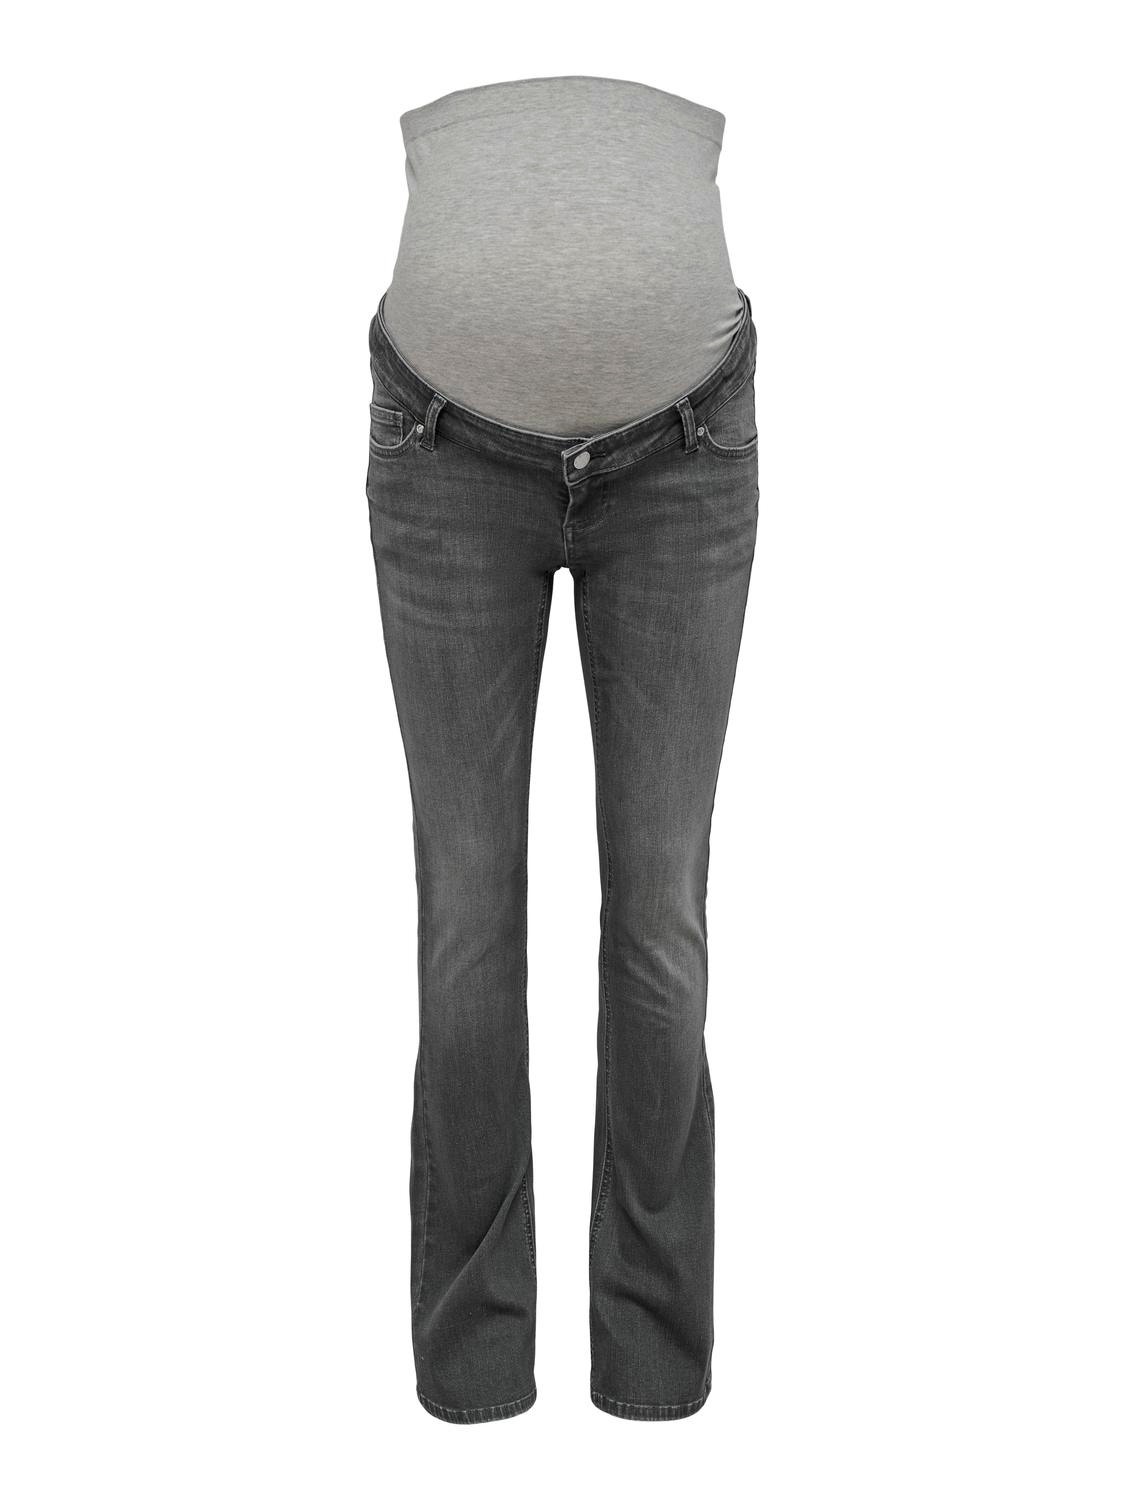 ONLY Jeans Flared Fit -Grey Denim - 15258926